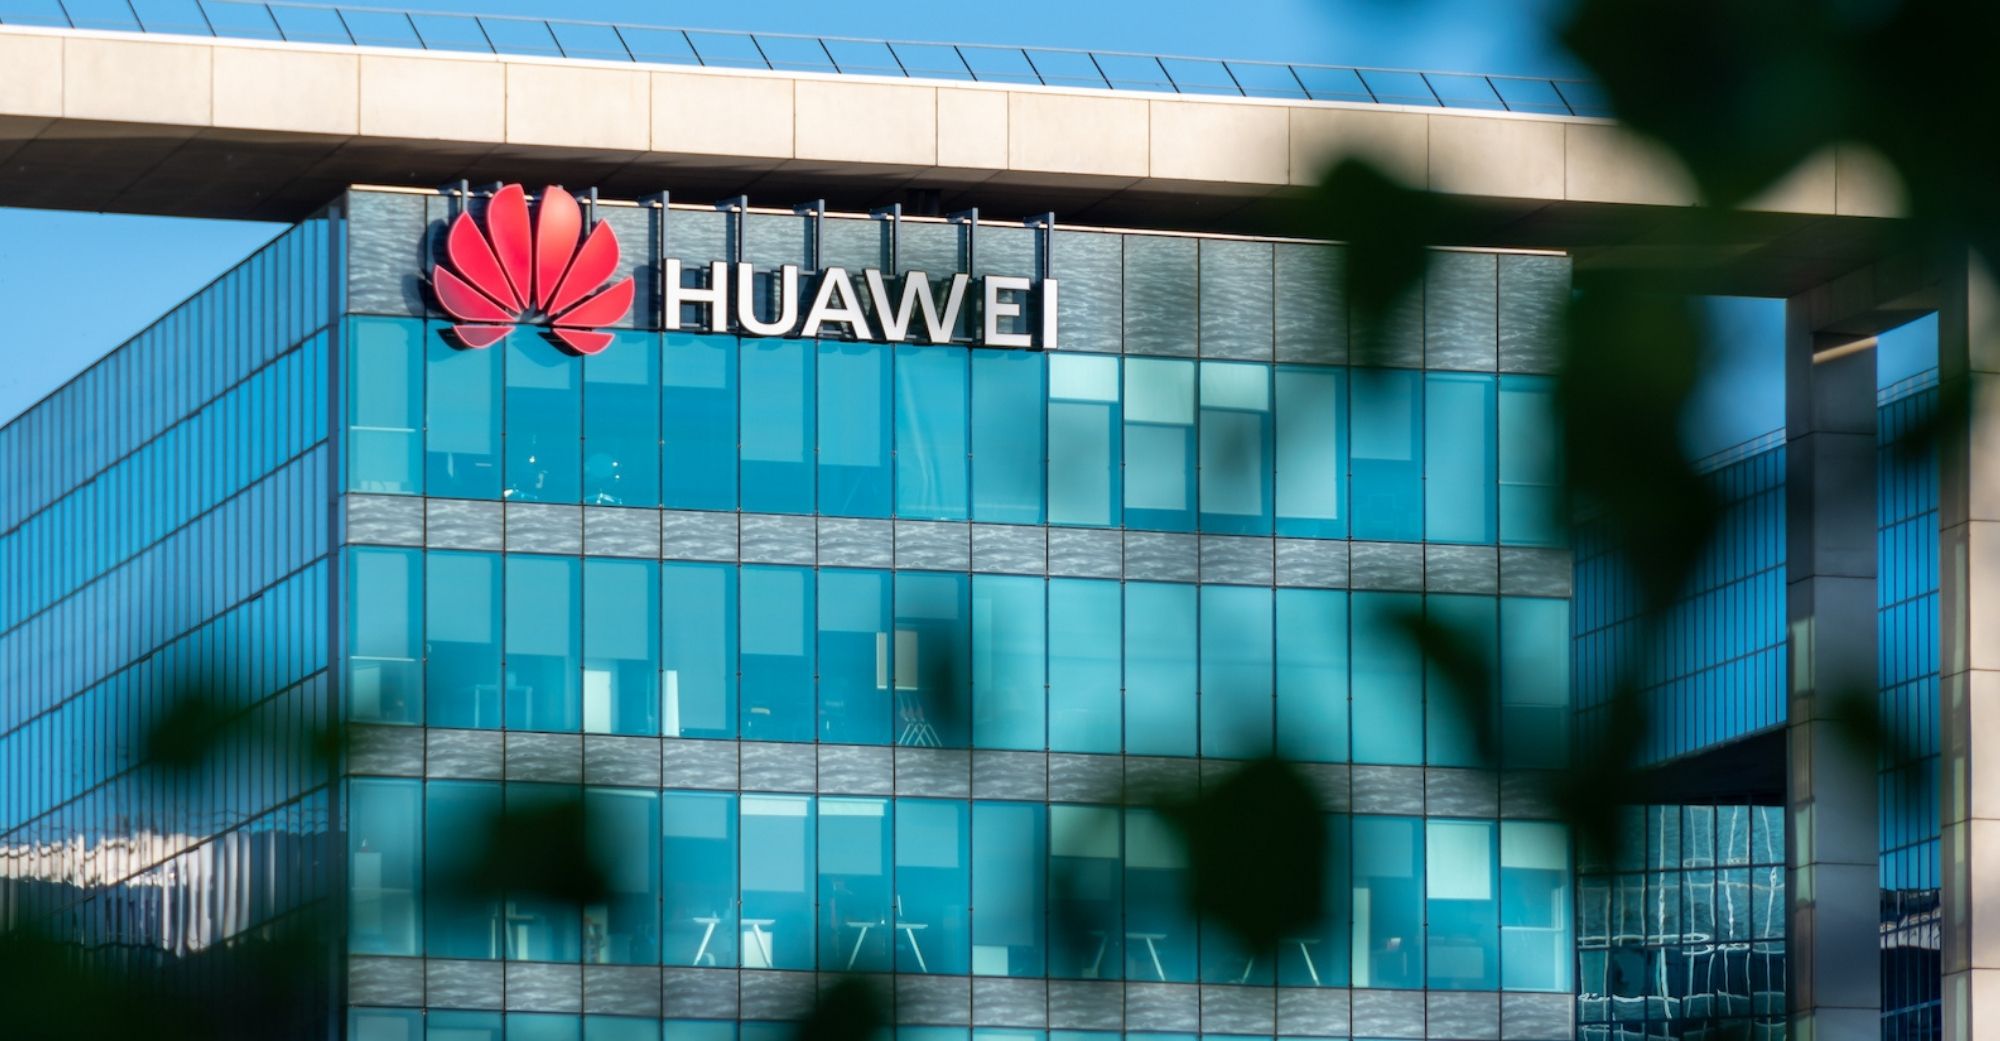 Amid advanced equity discussions, Huawei Technologies’ new smart car company was valued at around $35 million.